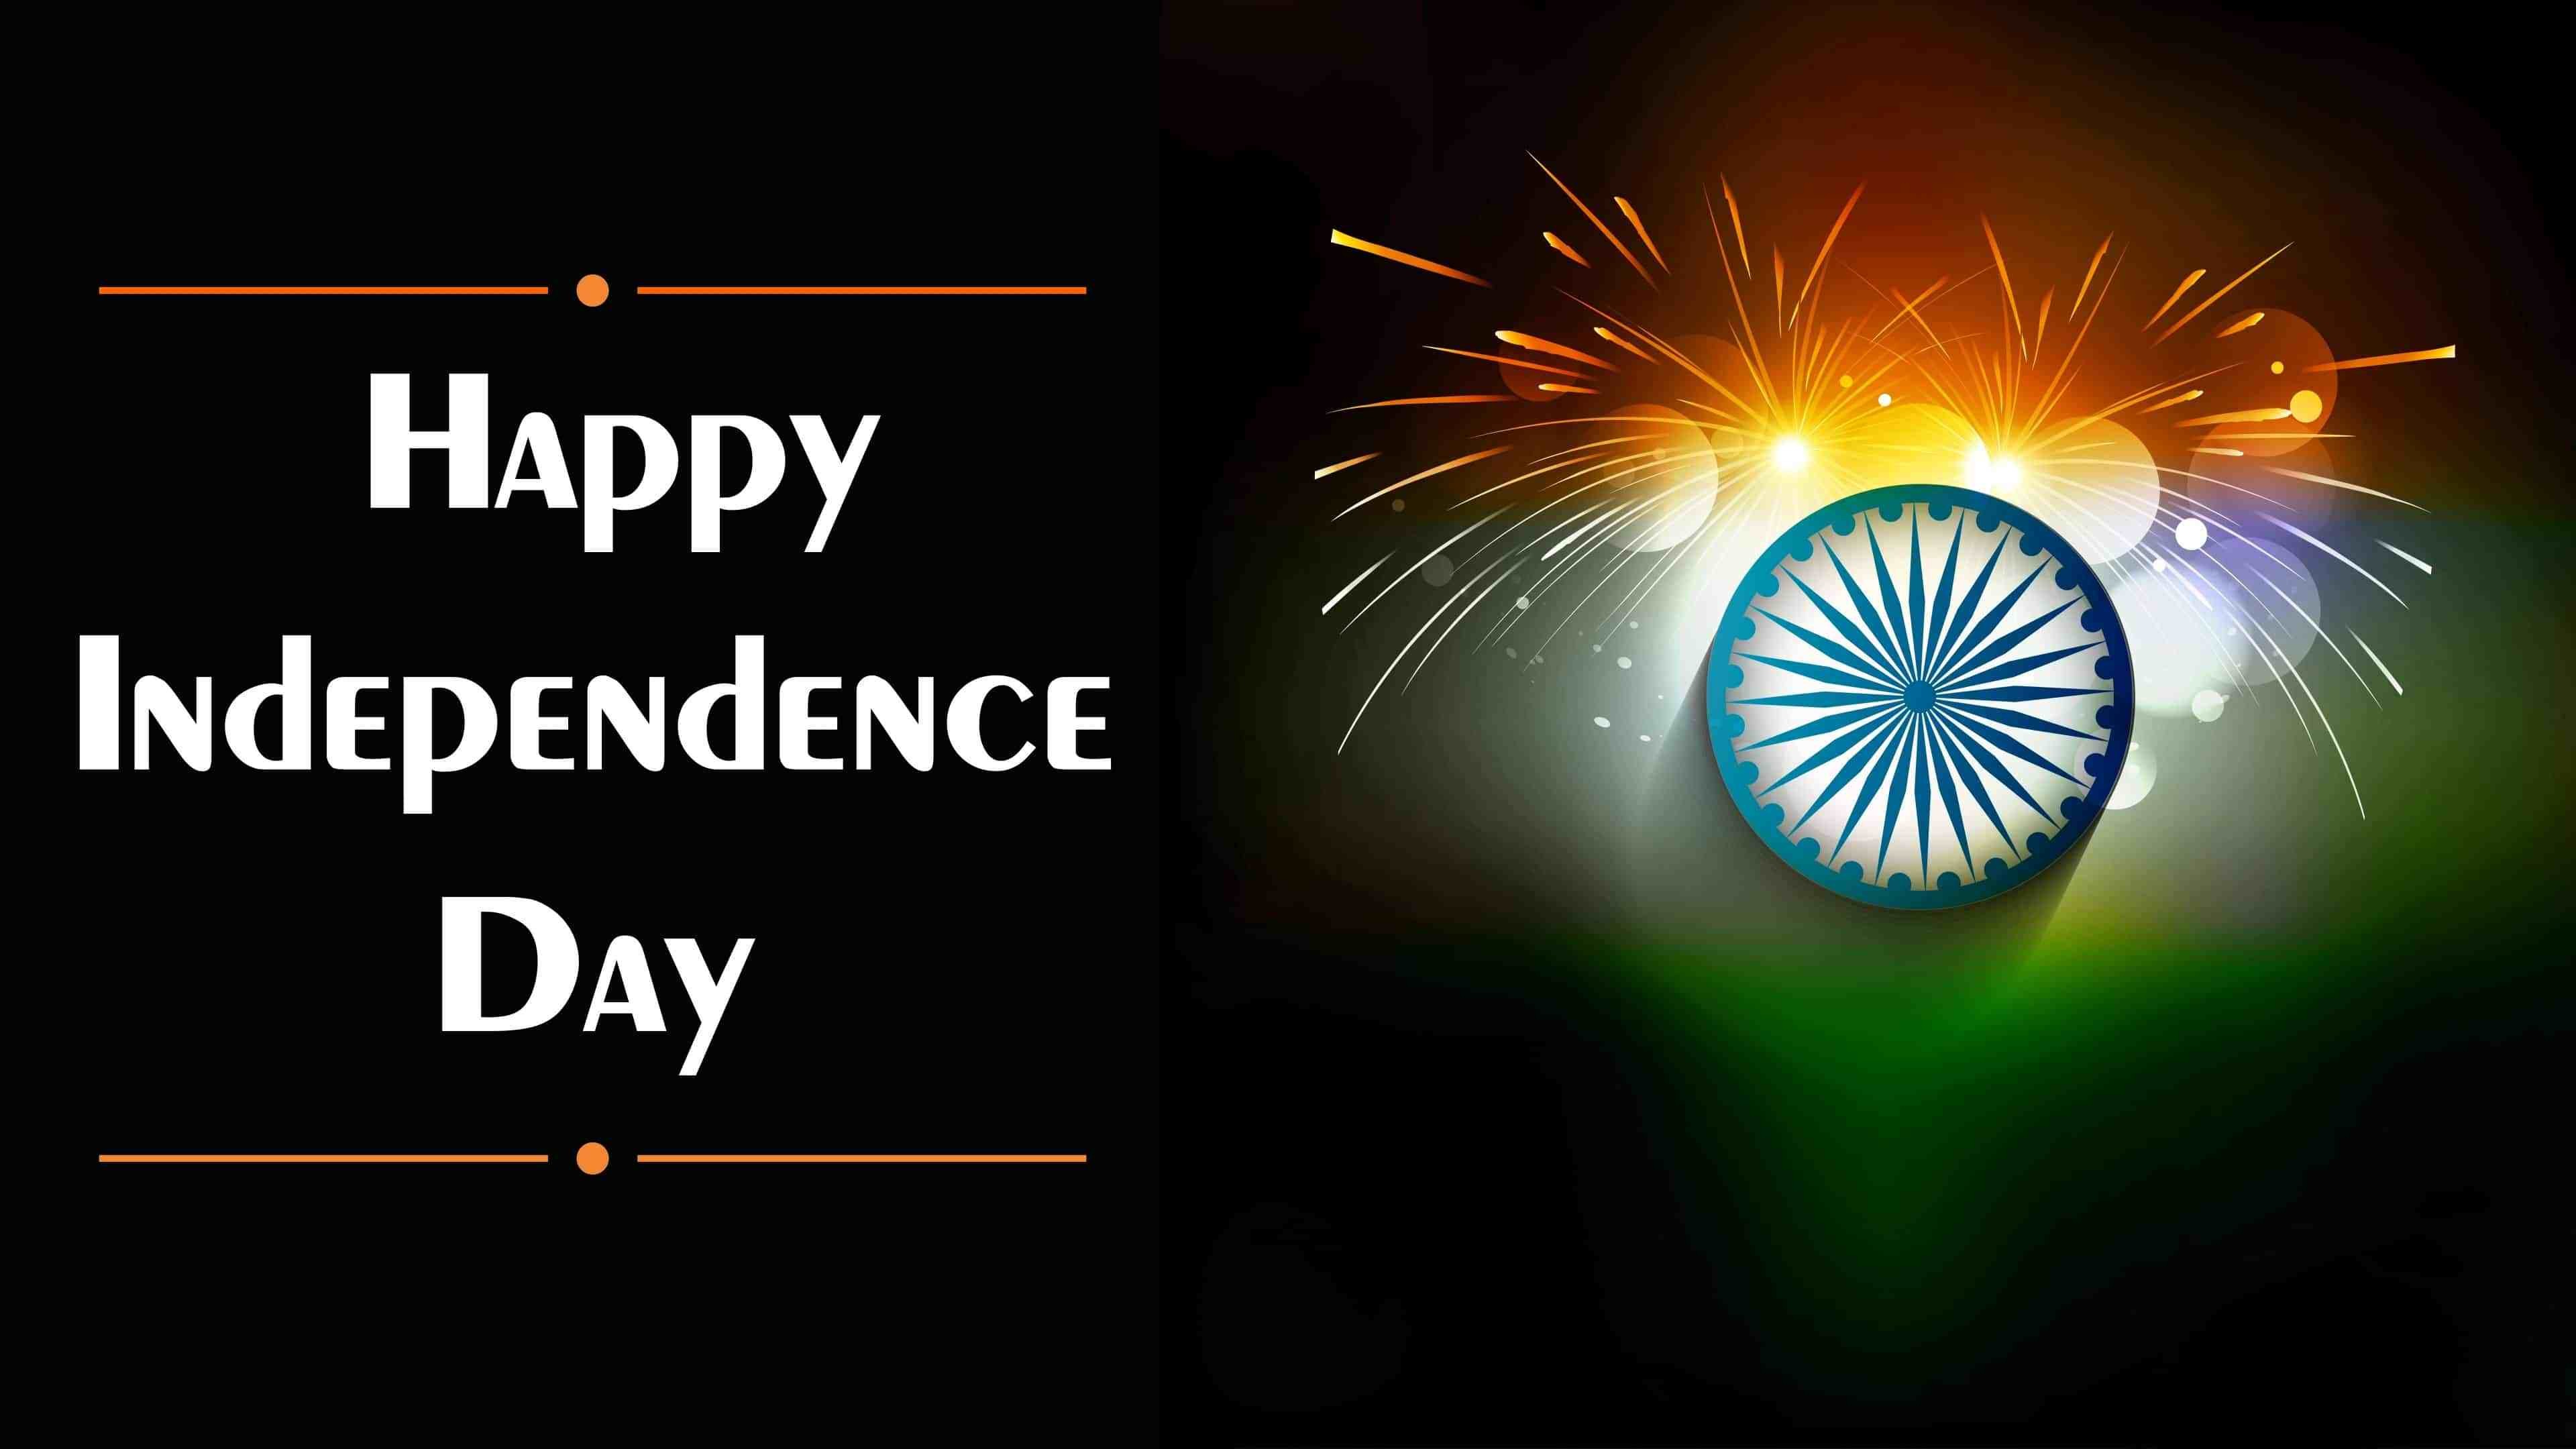 indian independence day wallpaper free download,fireworks,text,holiday,font,event